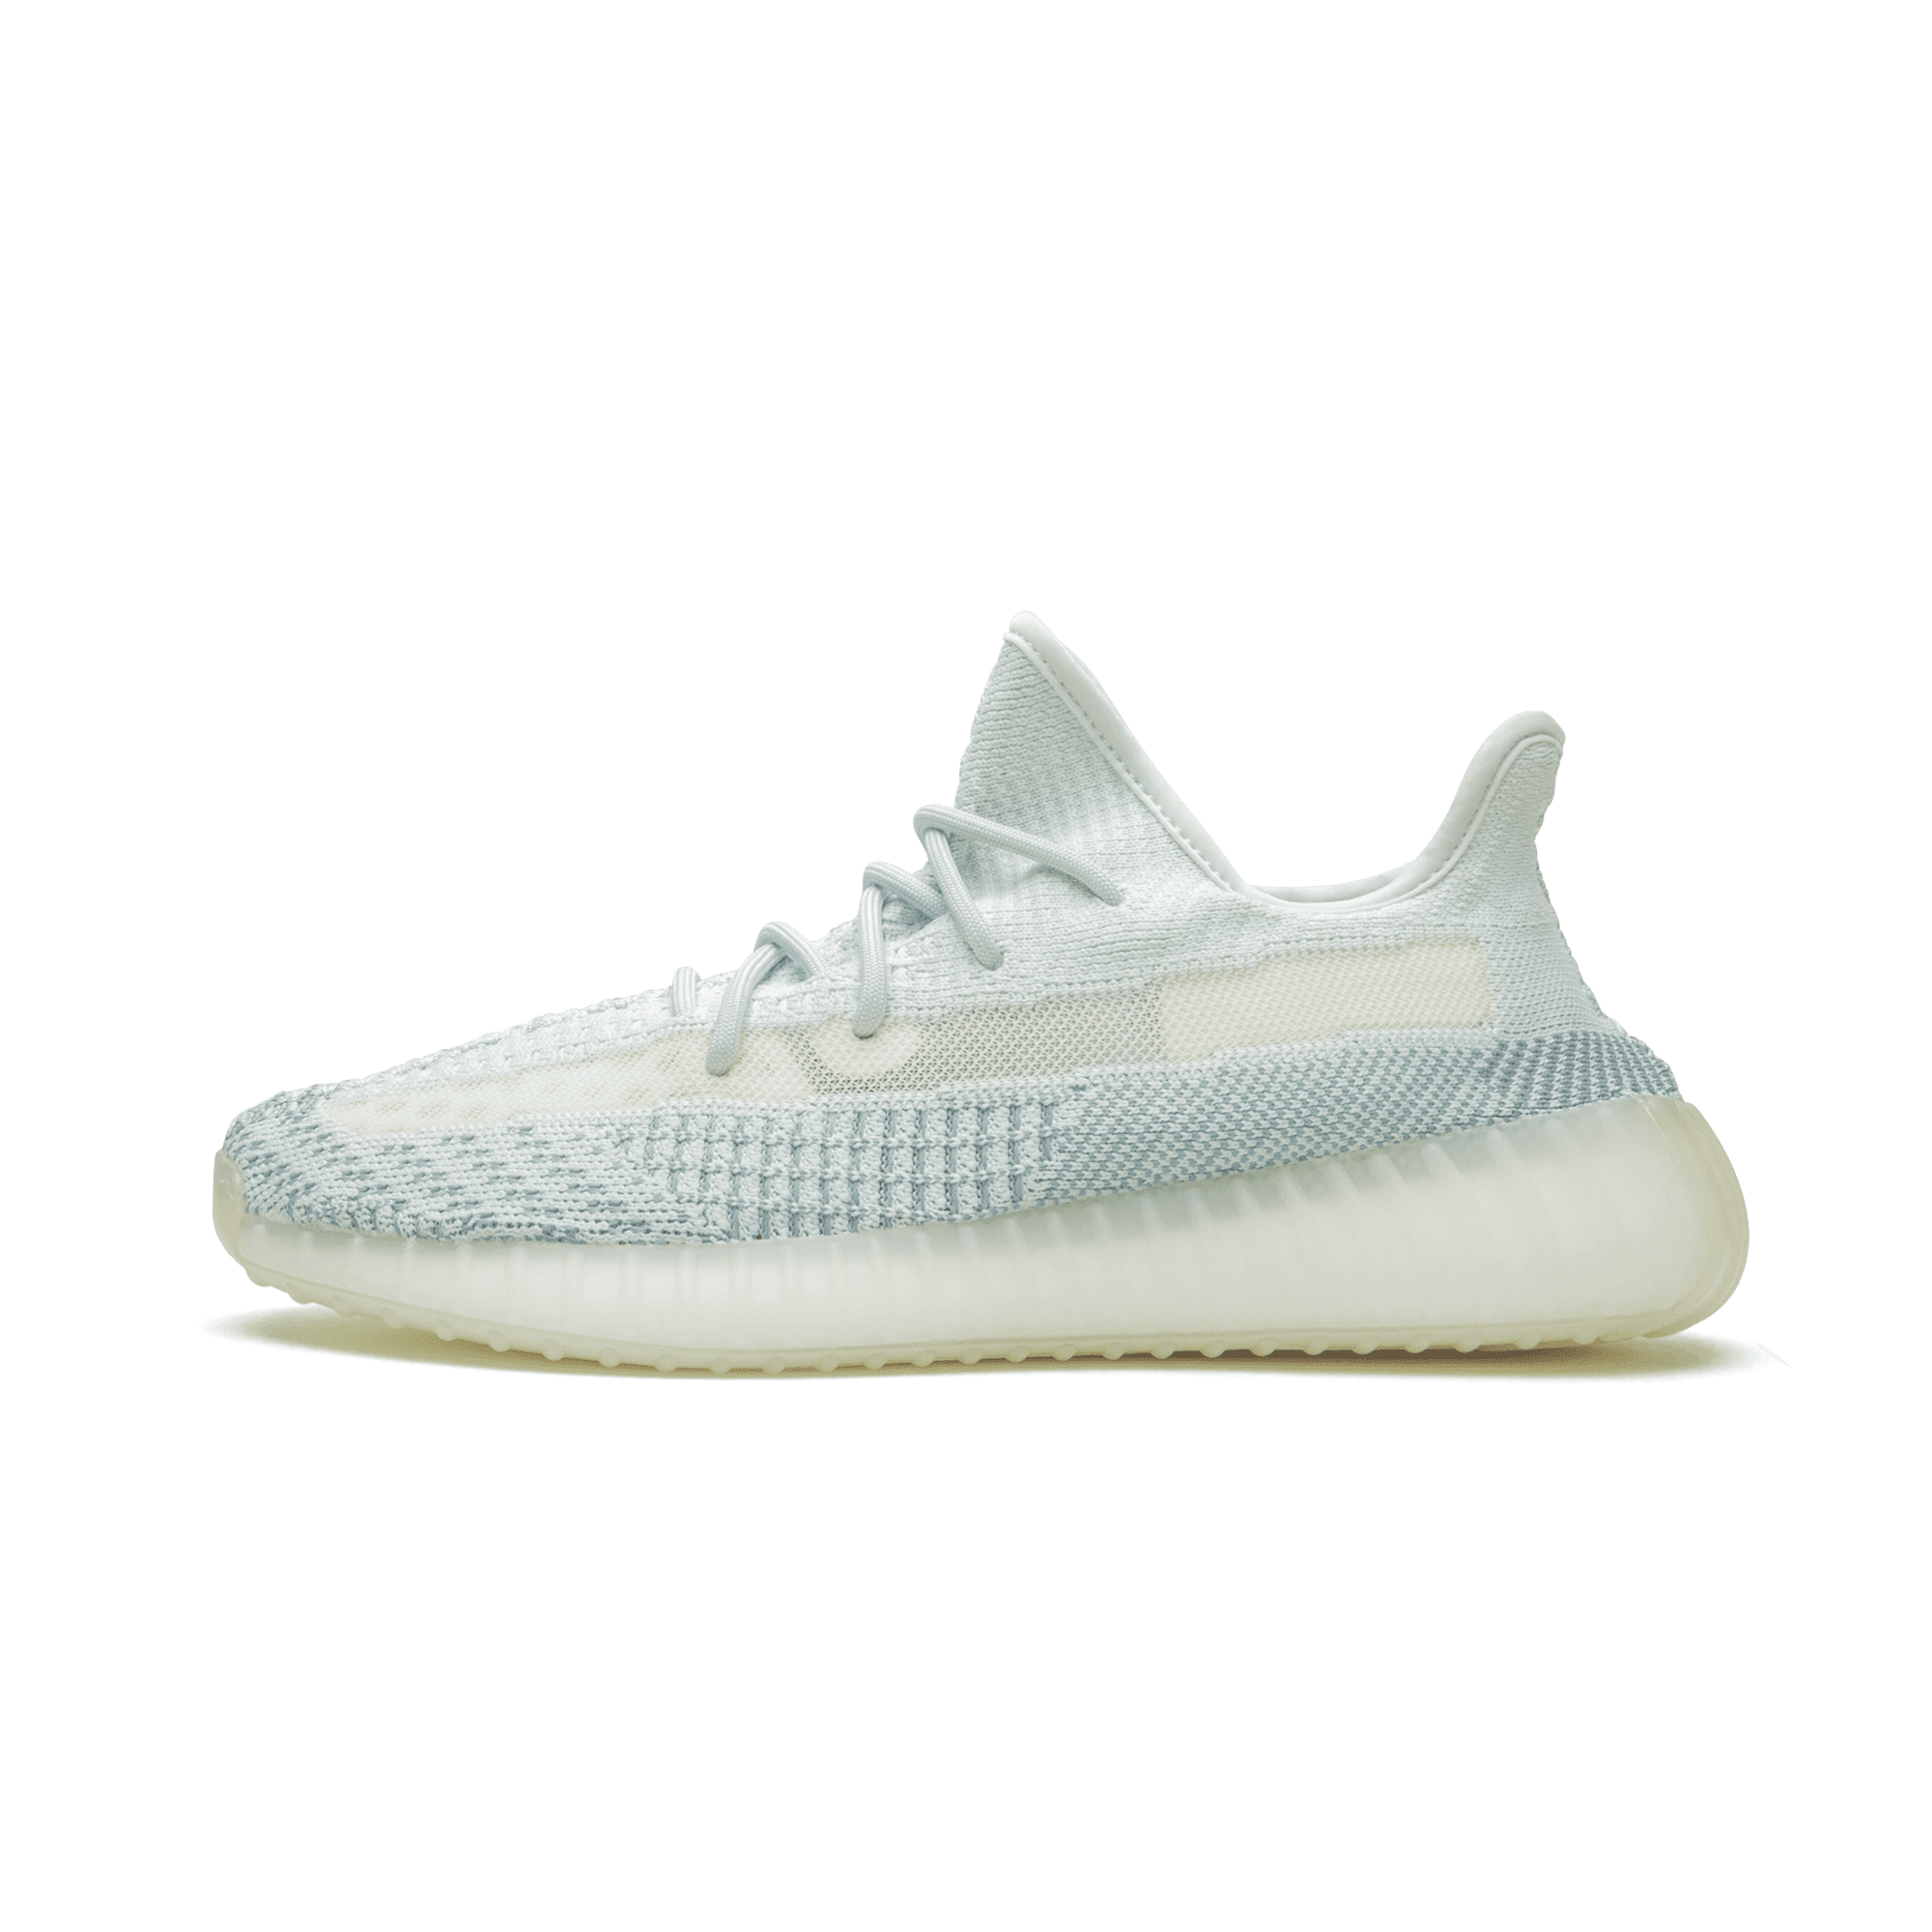 Yeezy Boost 350 V2  “Cloud White” (4049125605448)